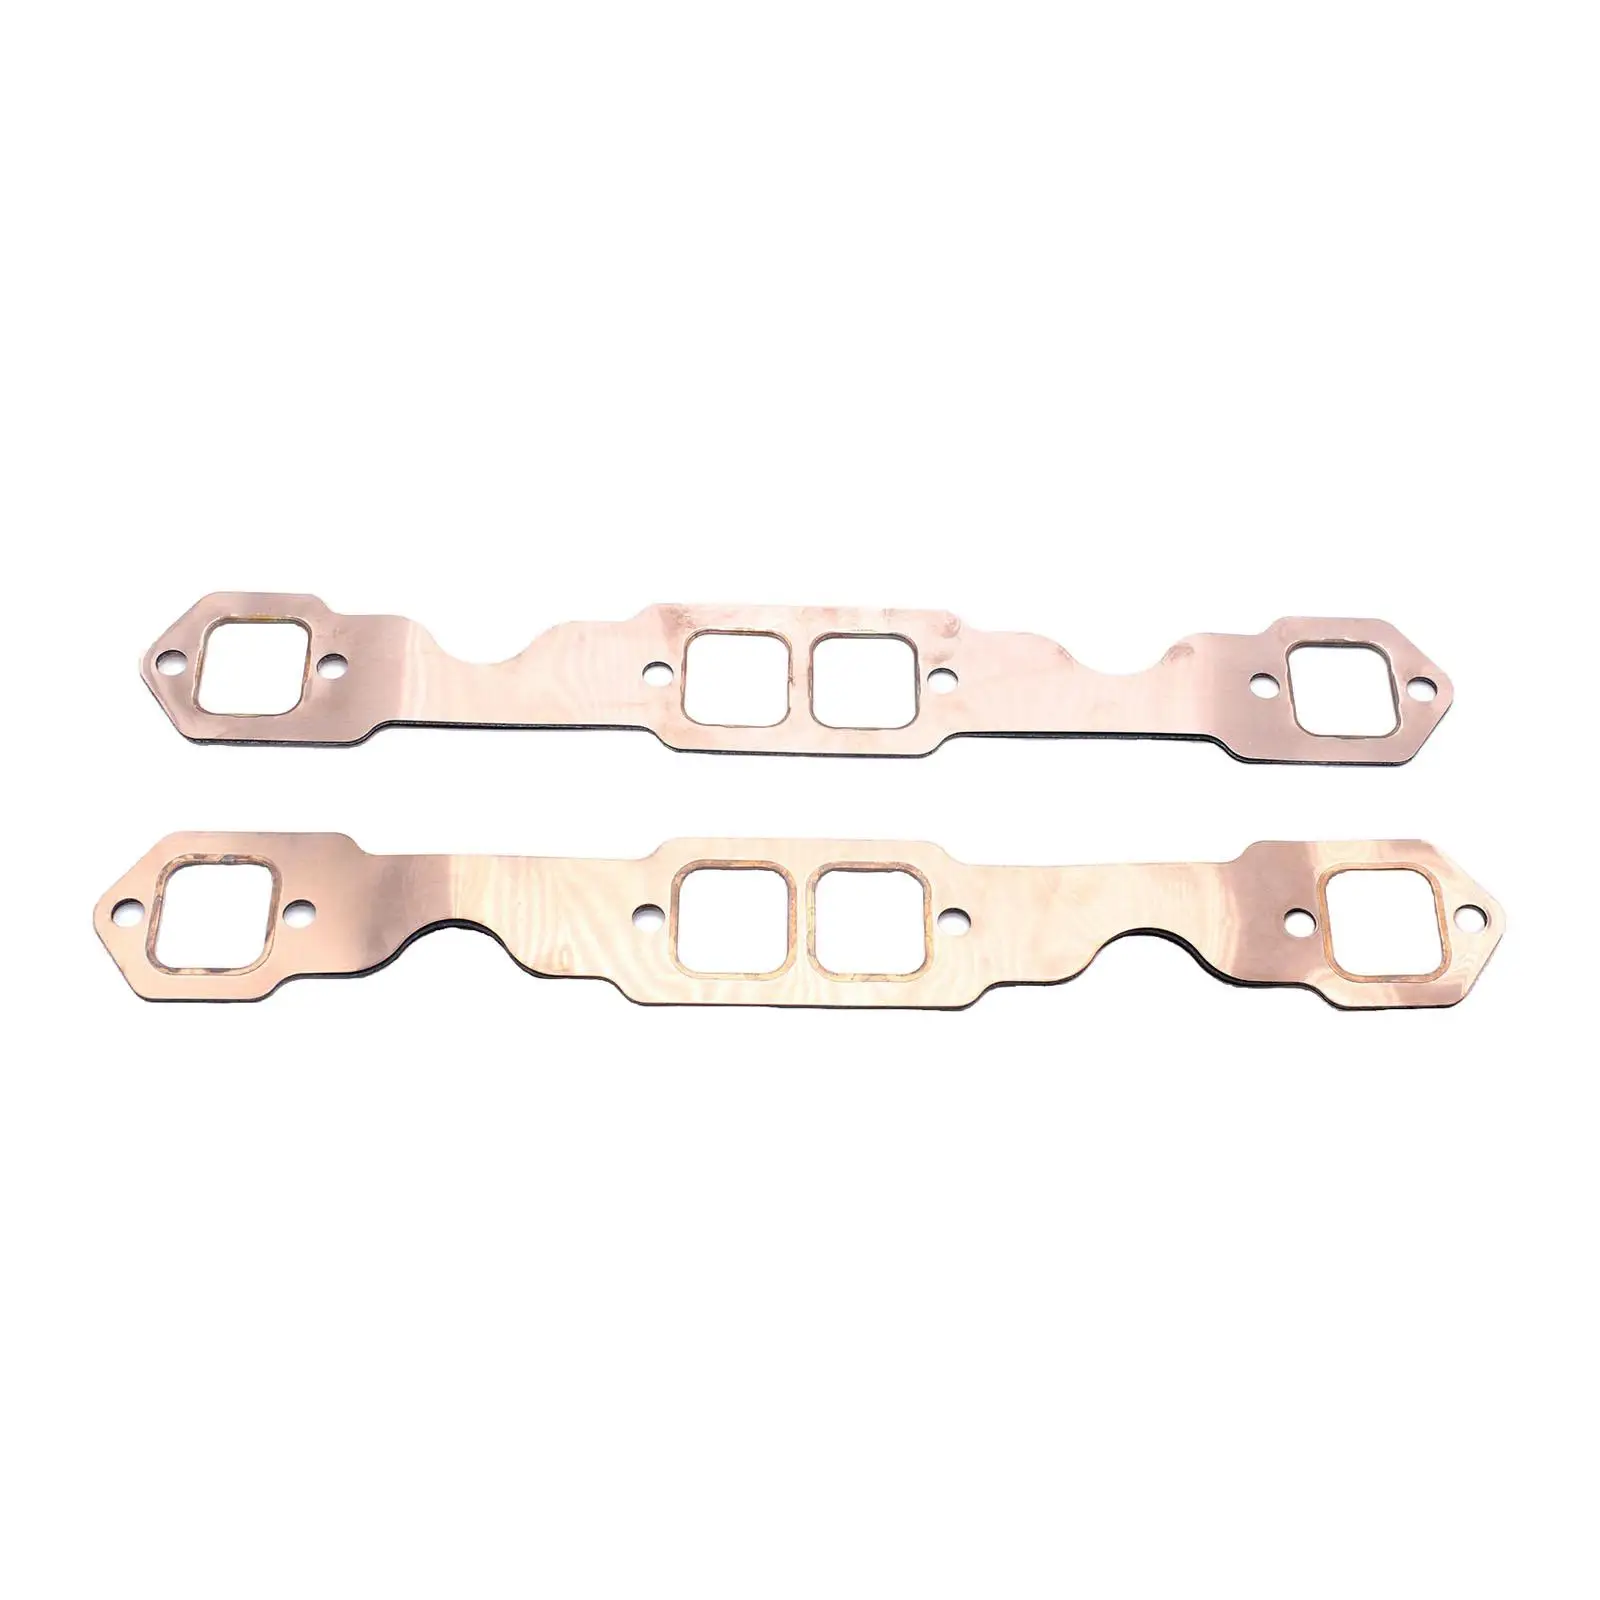 2x SBC Copper Header Exhaust Gasket Seal for Chevy SB 327 305 350 383 Replacement Perfect Fitment, directly replacement